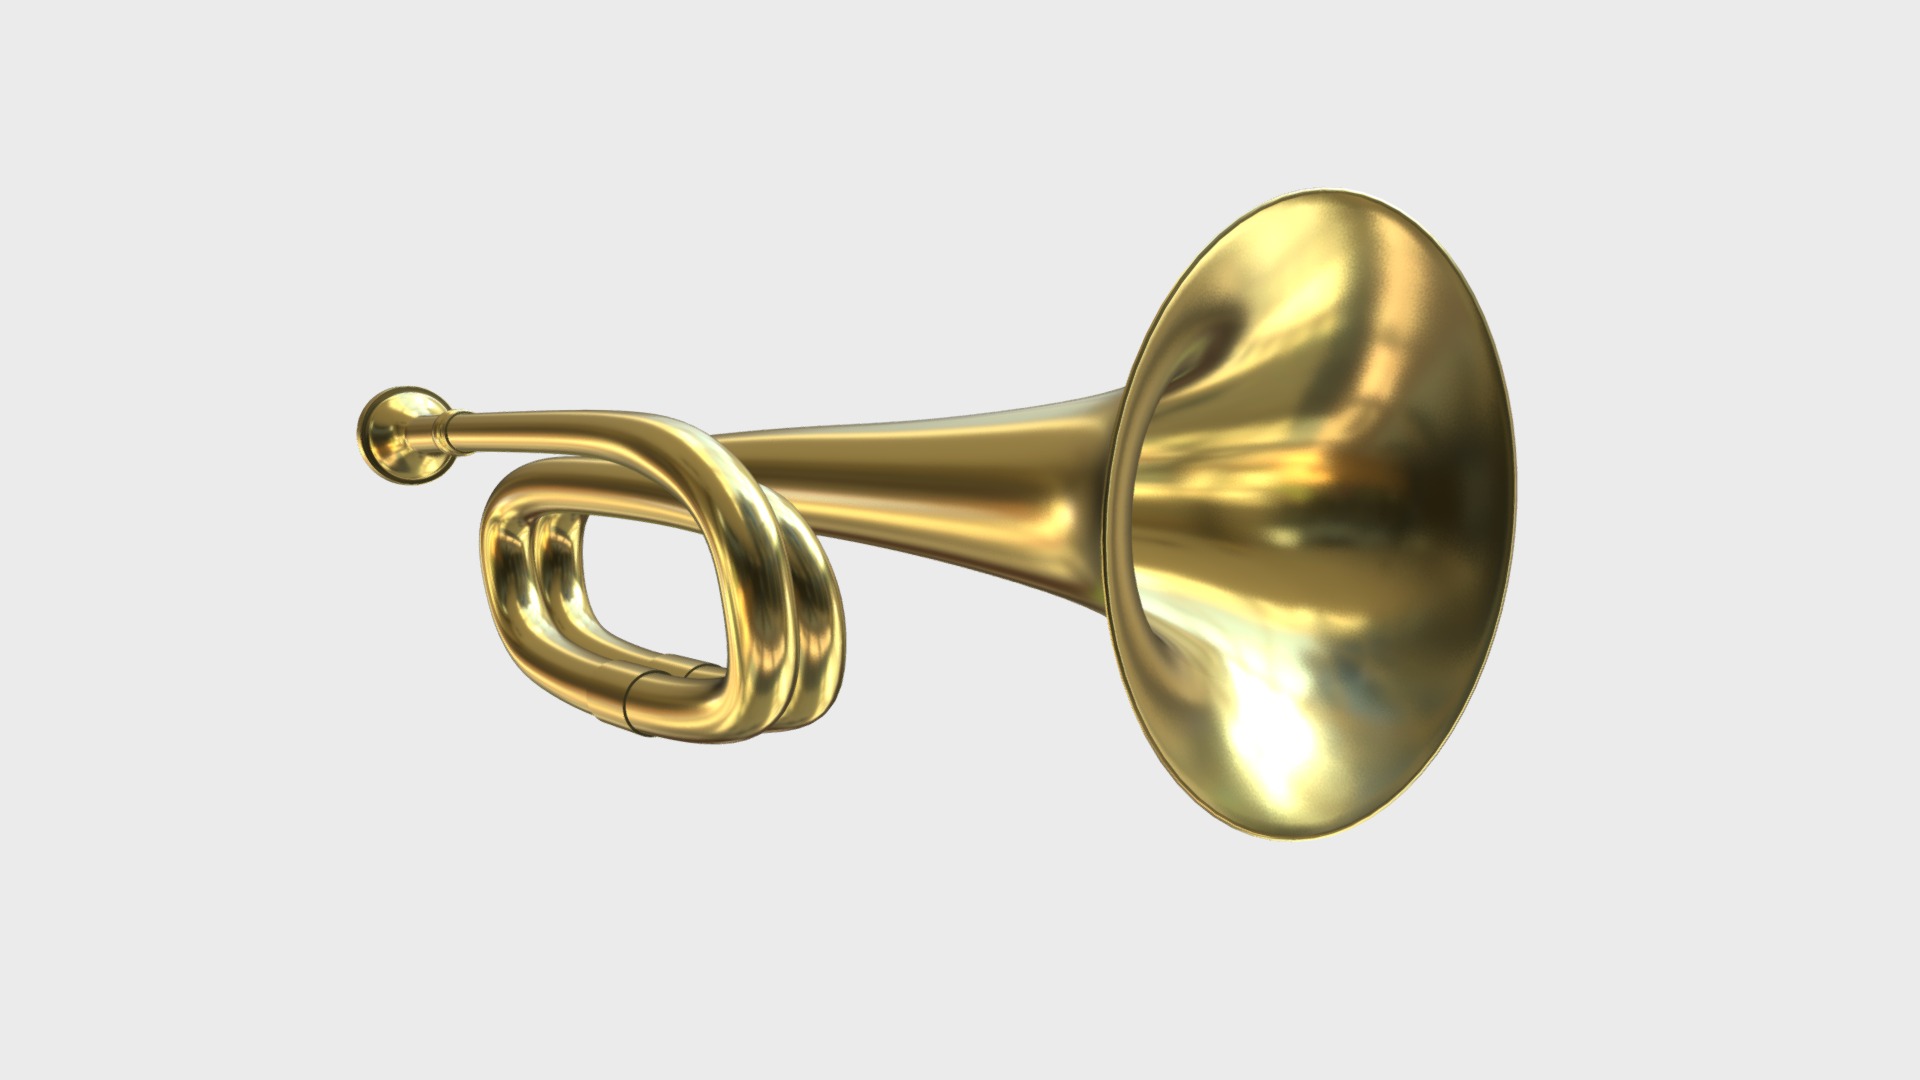 3D model Cavalry trumpet - This is a 3D model of the Cavalry trumpet. The 3D model is about a gold and silver trumpet.